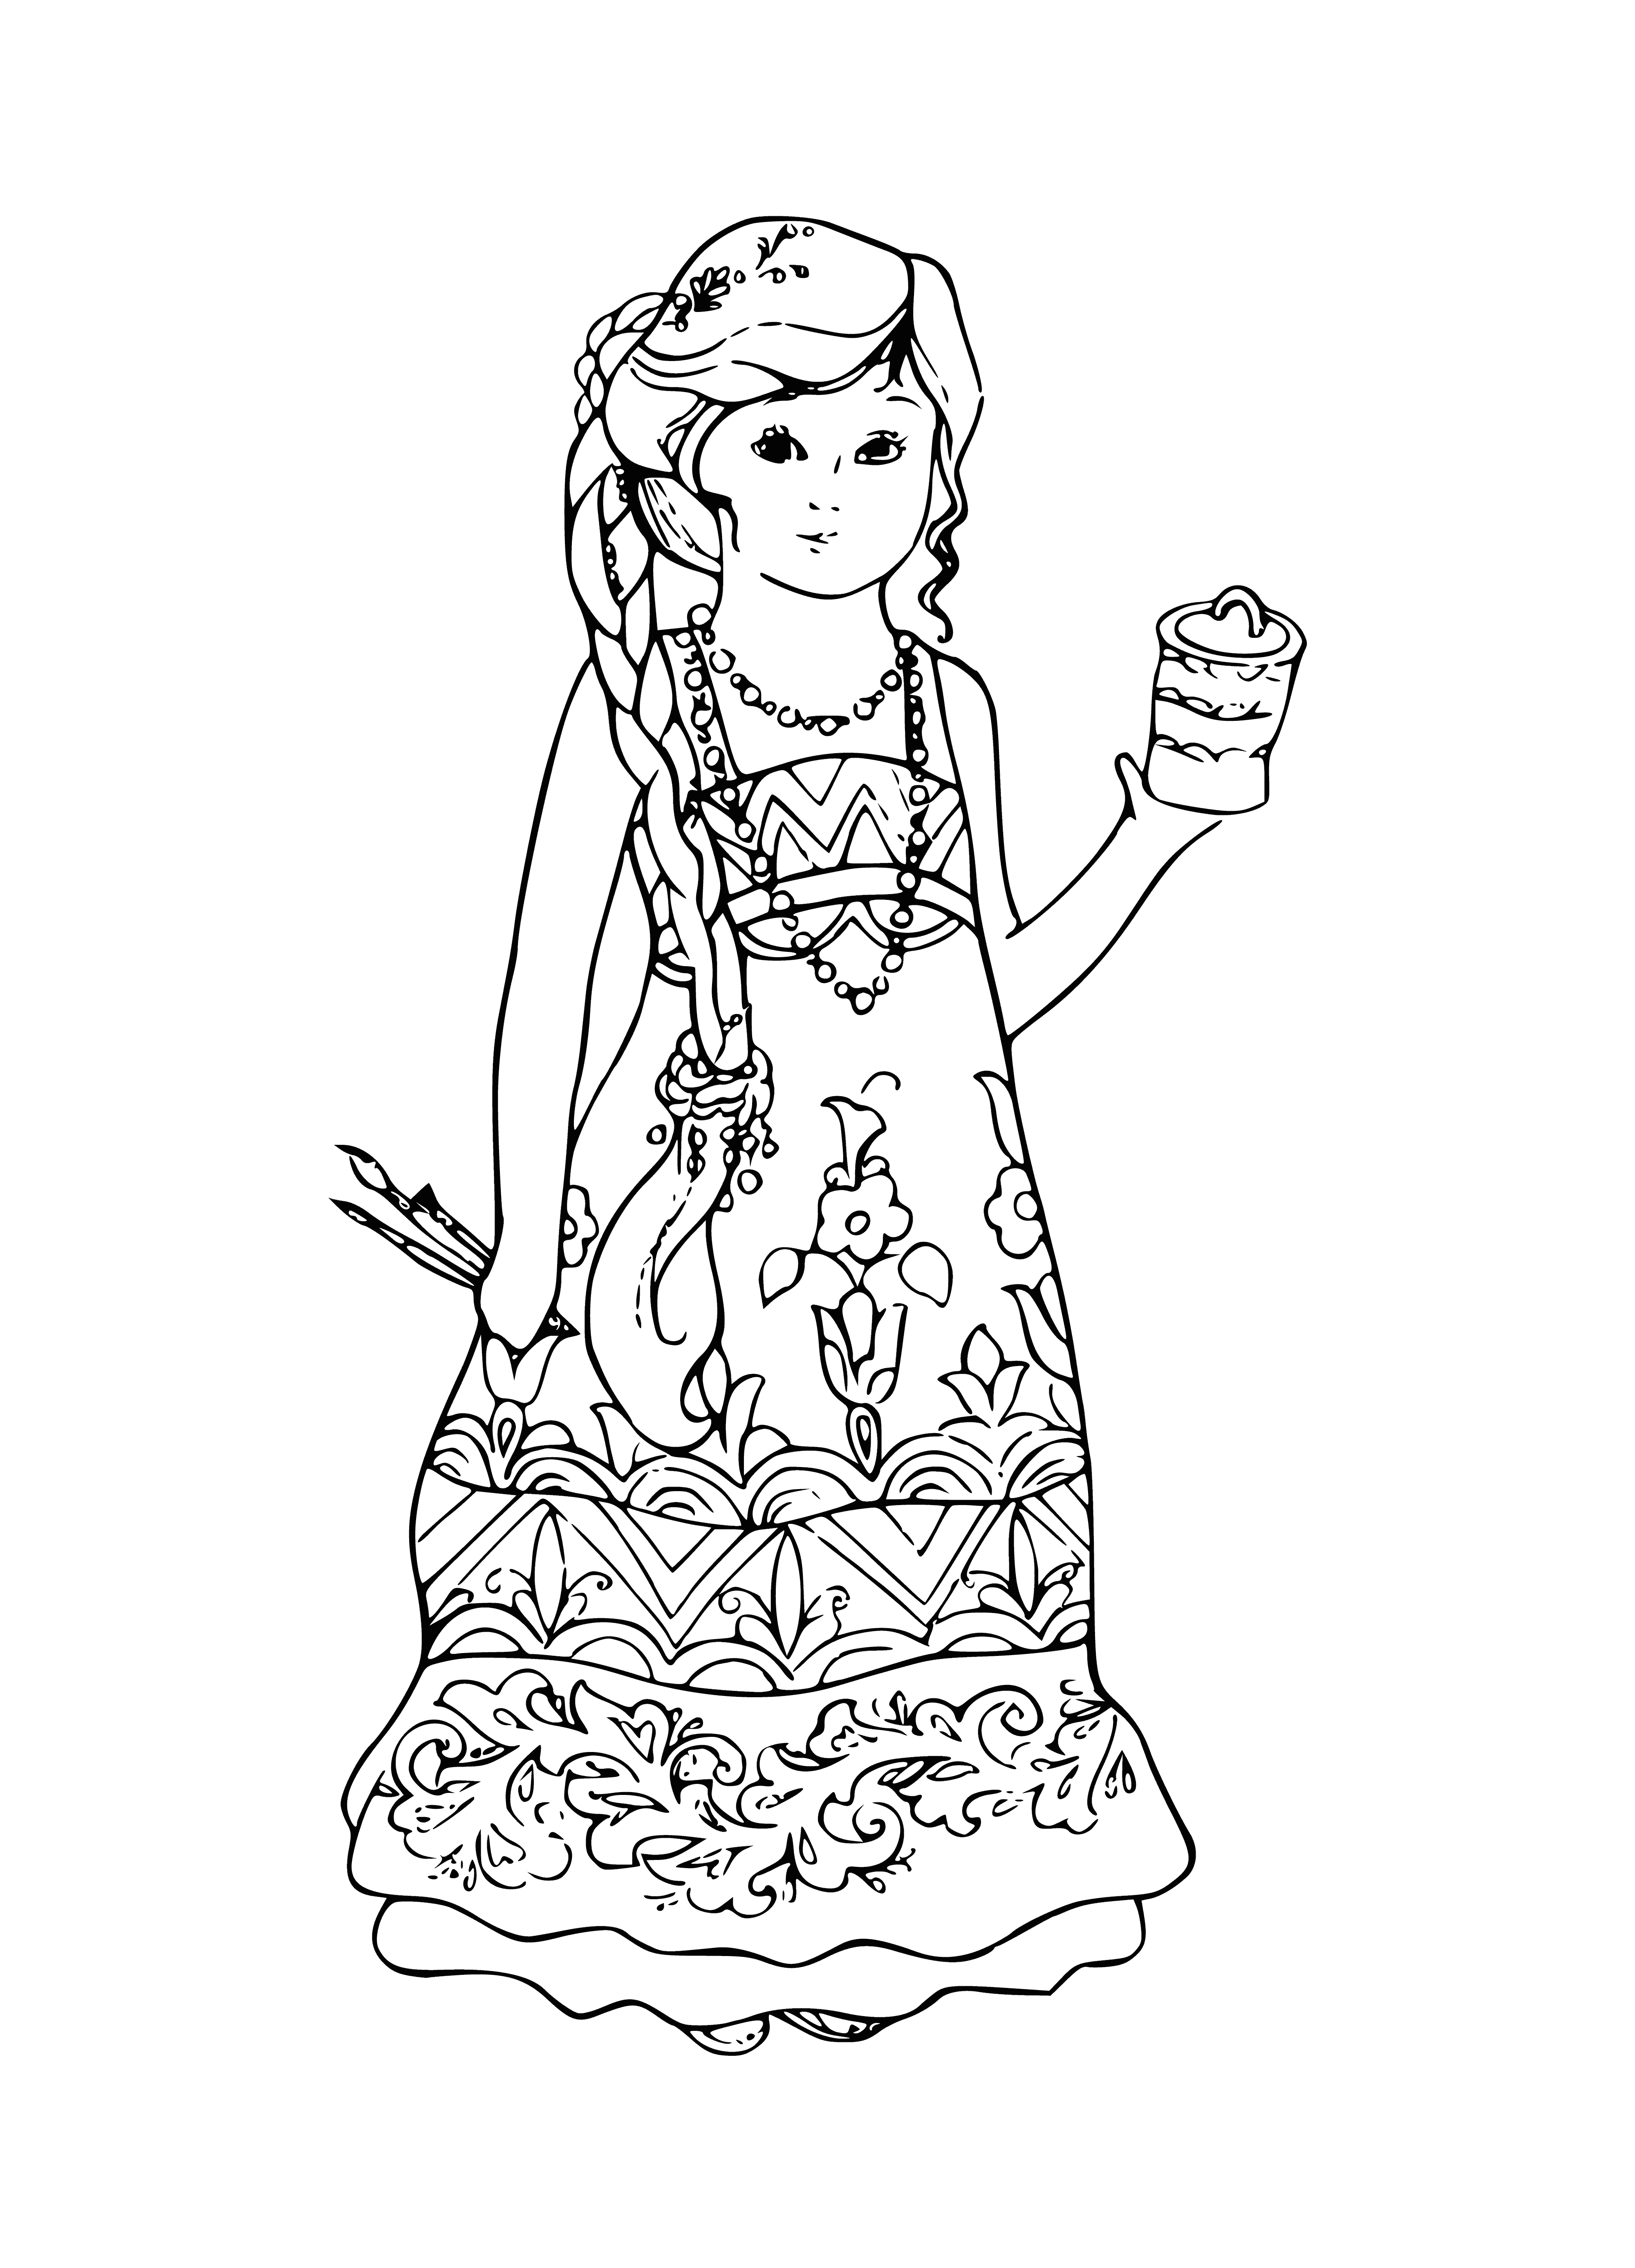 Permogorsk painting coloring page